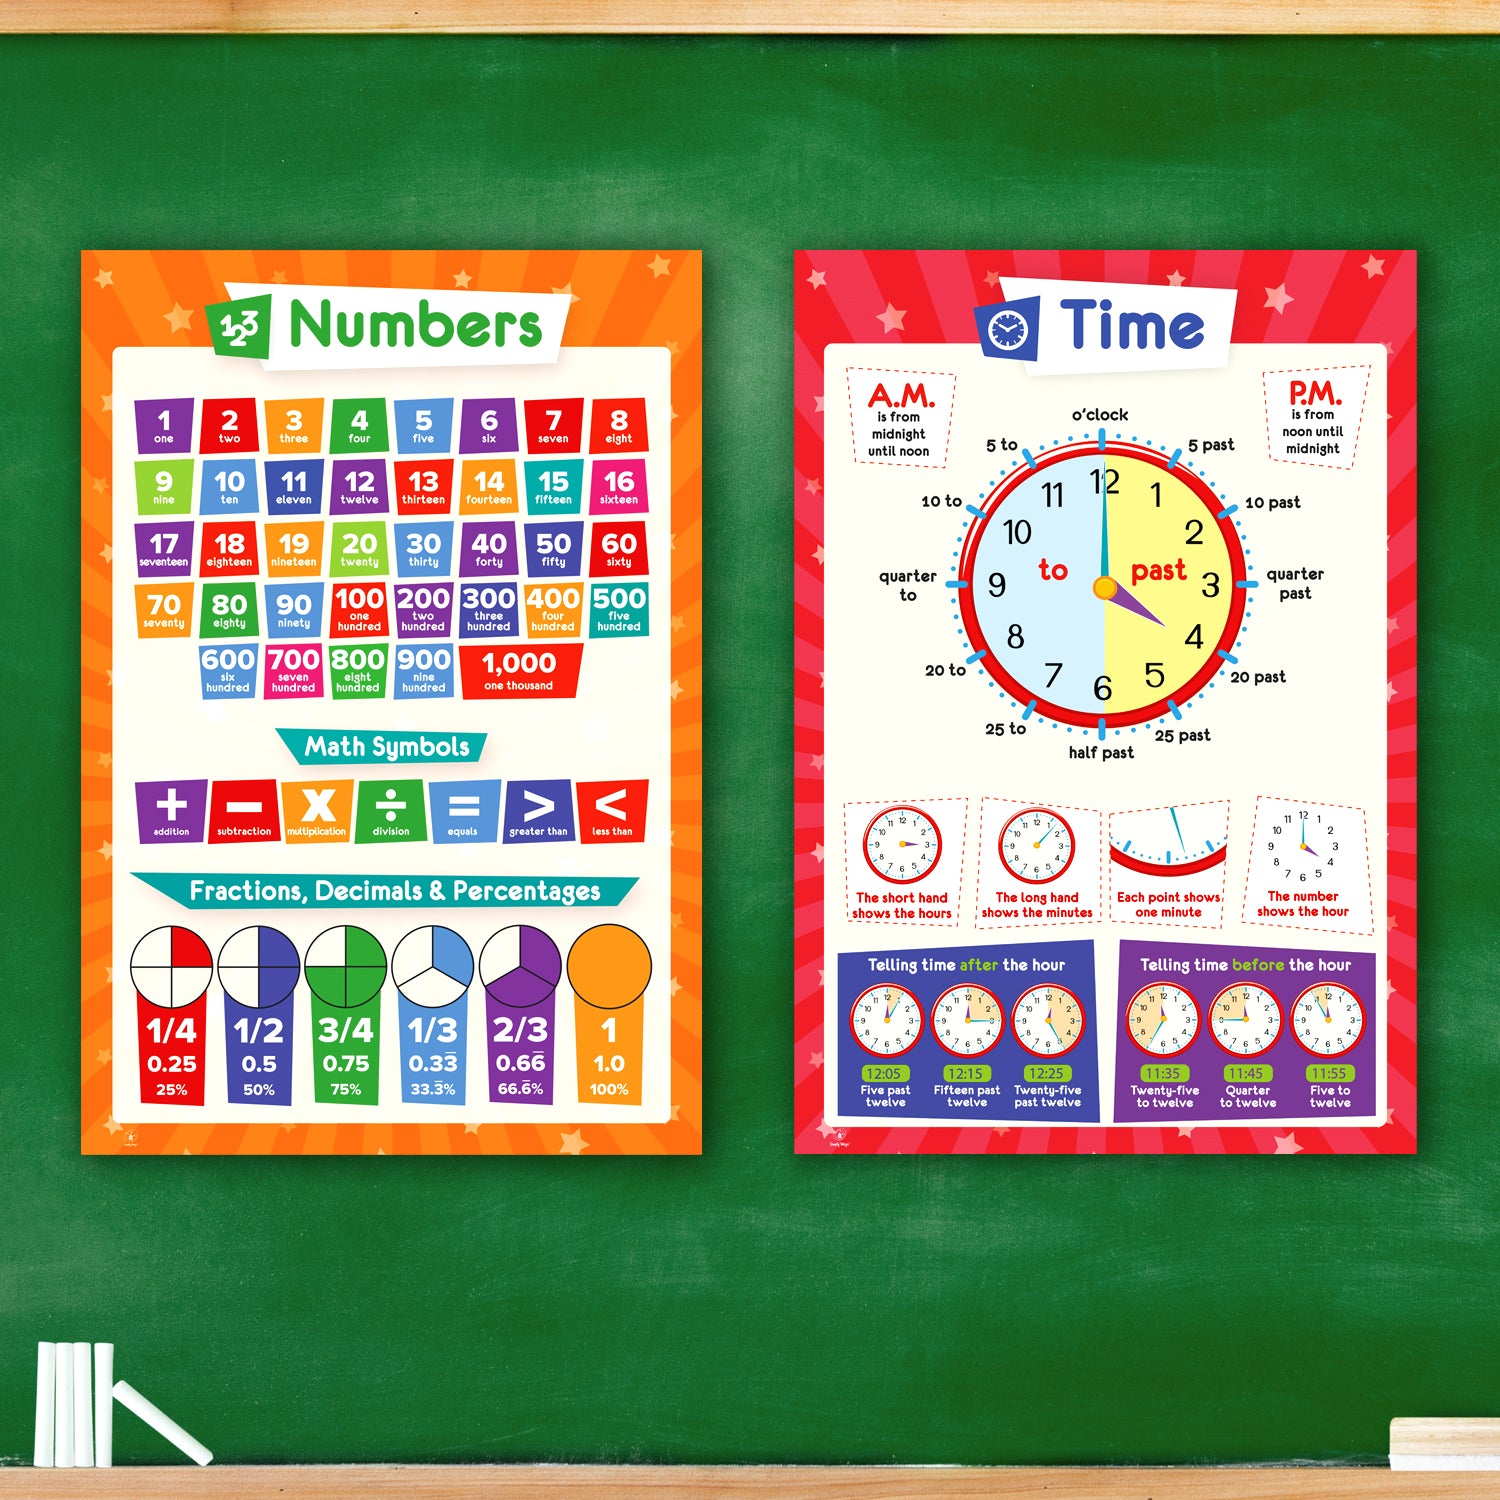 11 Educational Math Posters